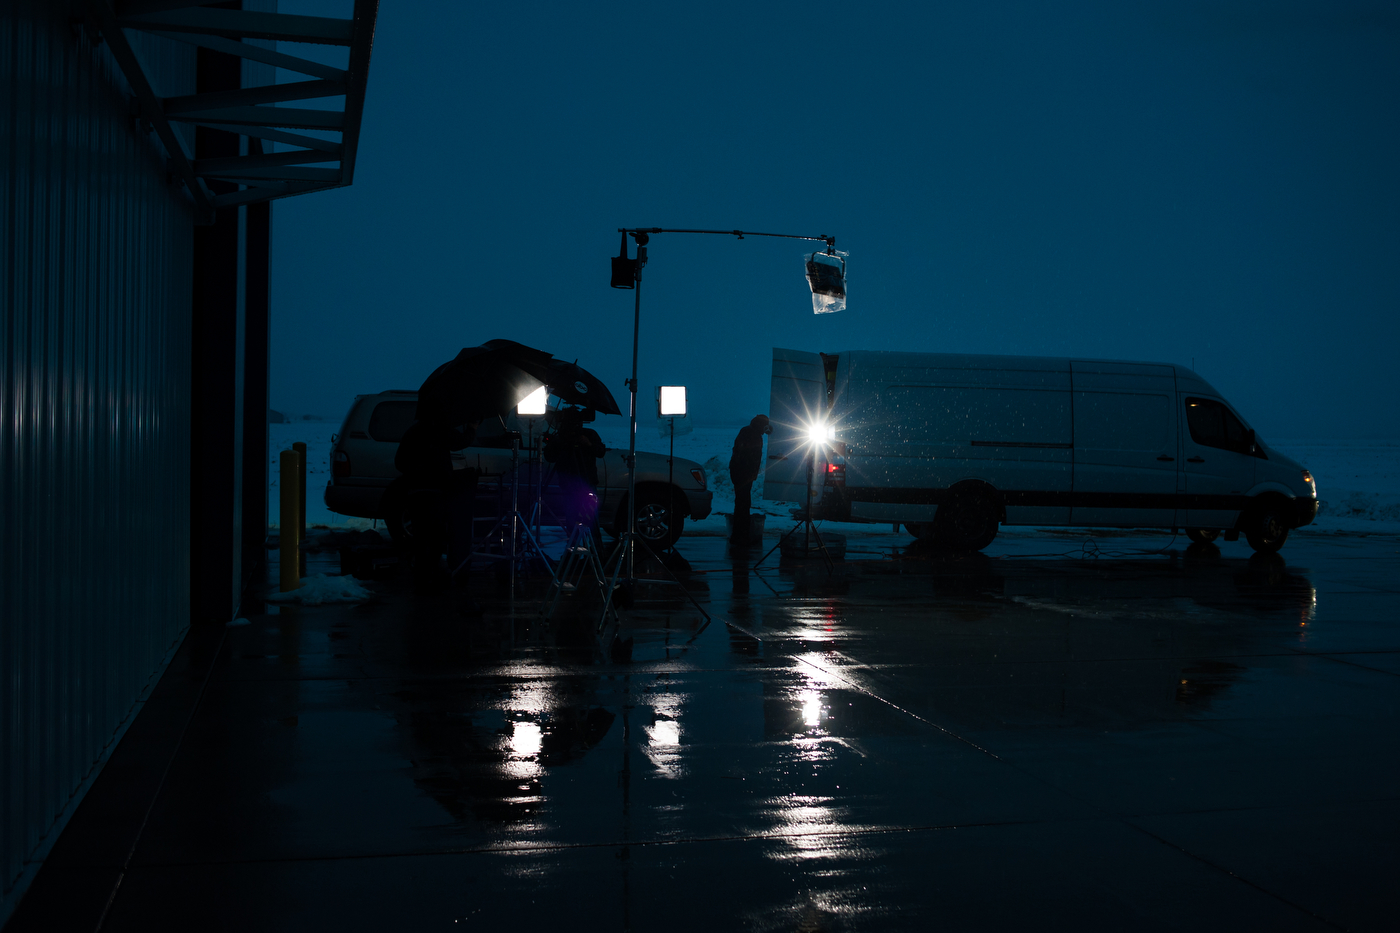  An ABC News crew sets up for a live broadcast in the rain Republican U.S. presidential candidate Ted Cruz speaks inside a hangar at the Webster City Municipal Airport in Webster City, Iowa on January 7, 2016. 